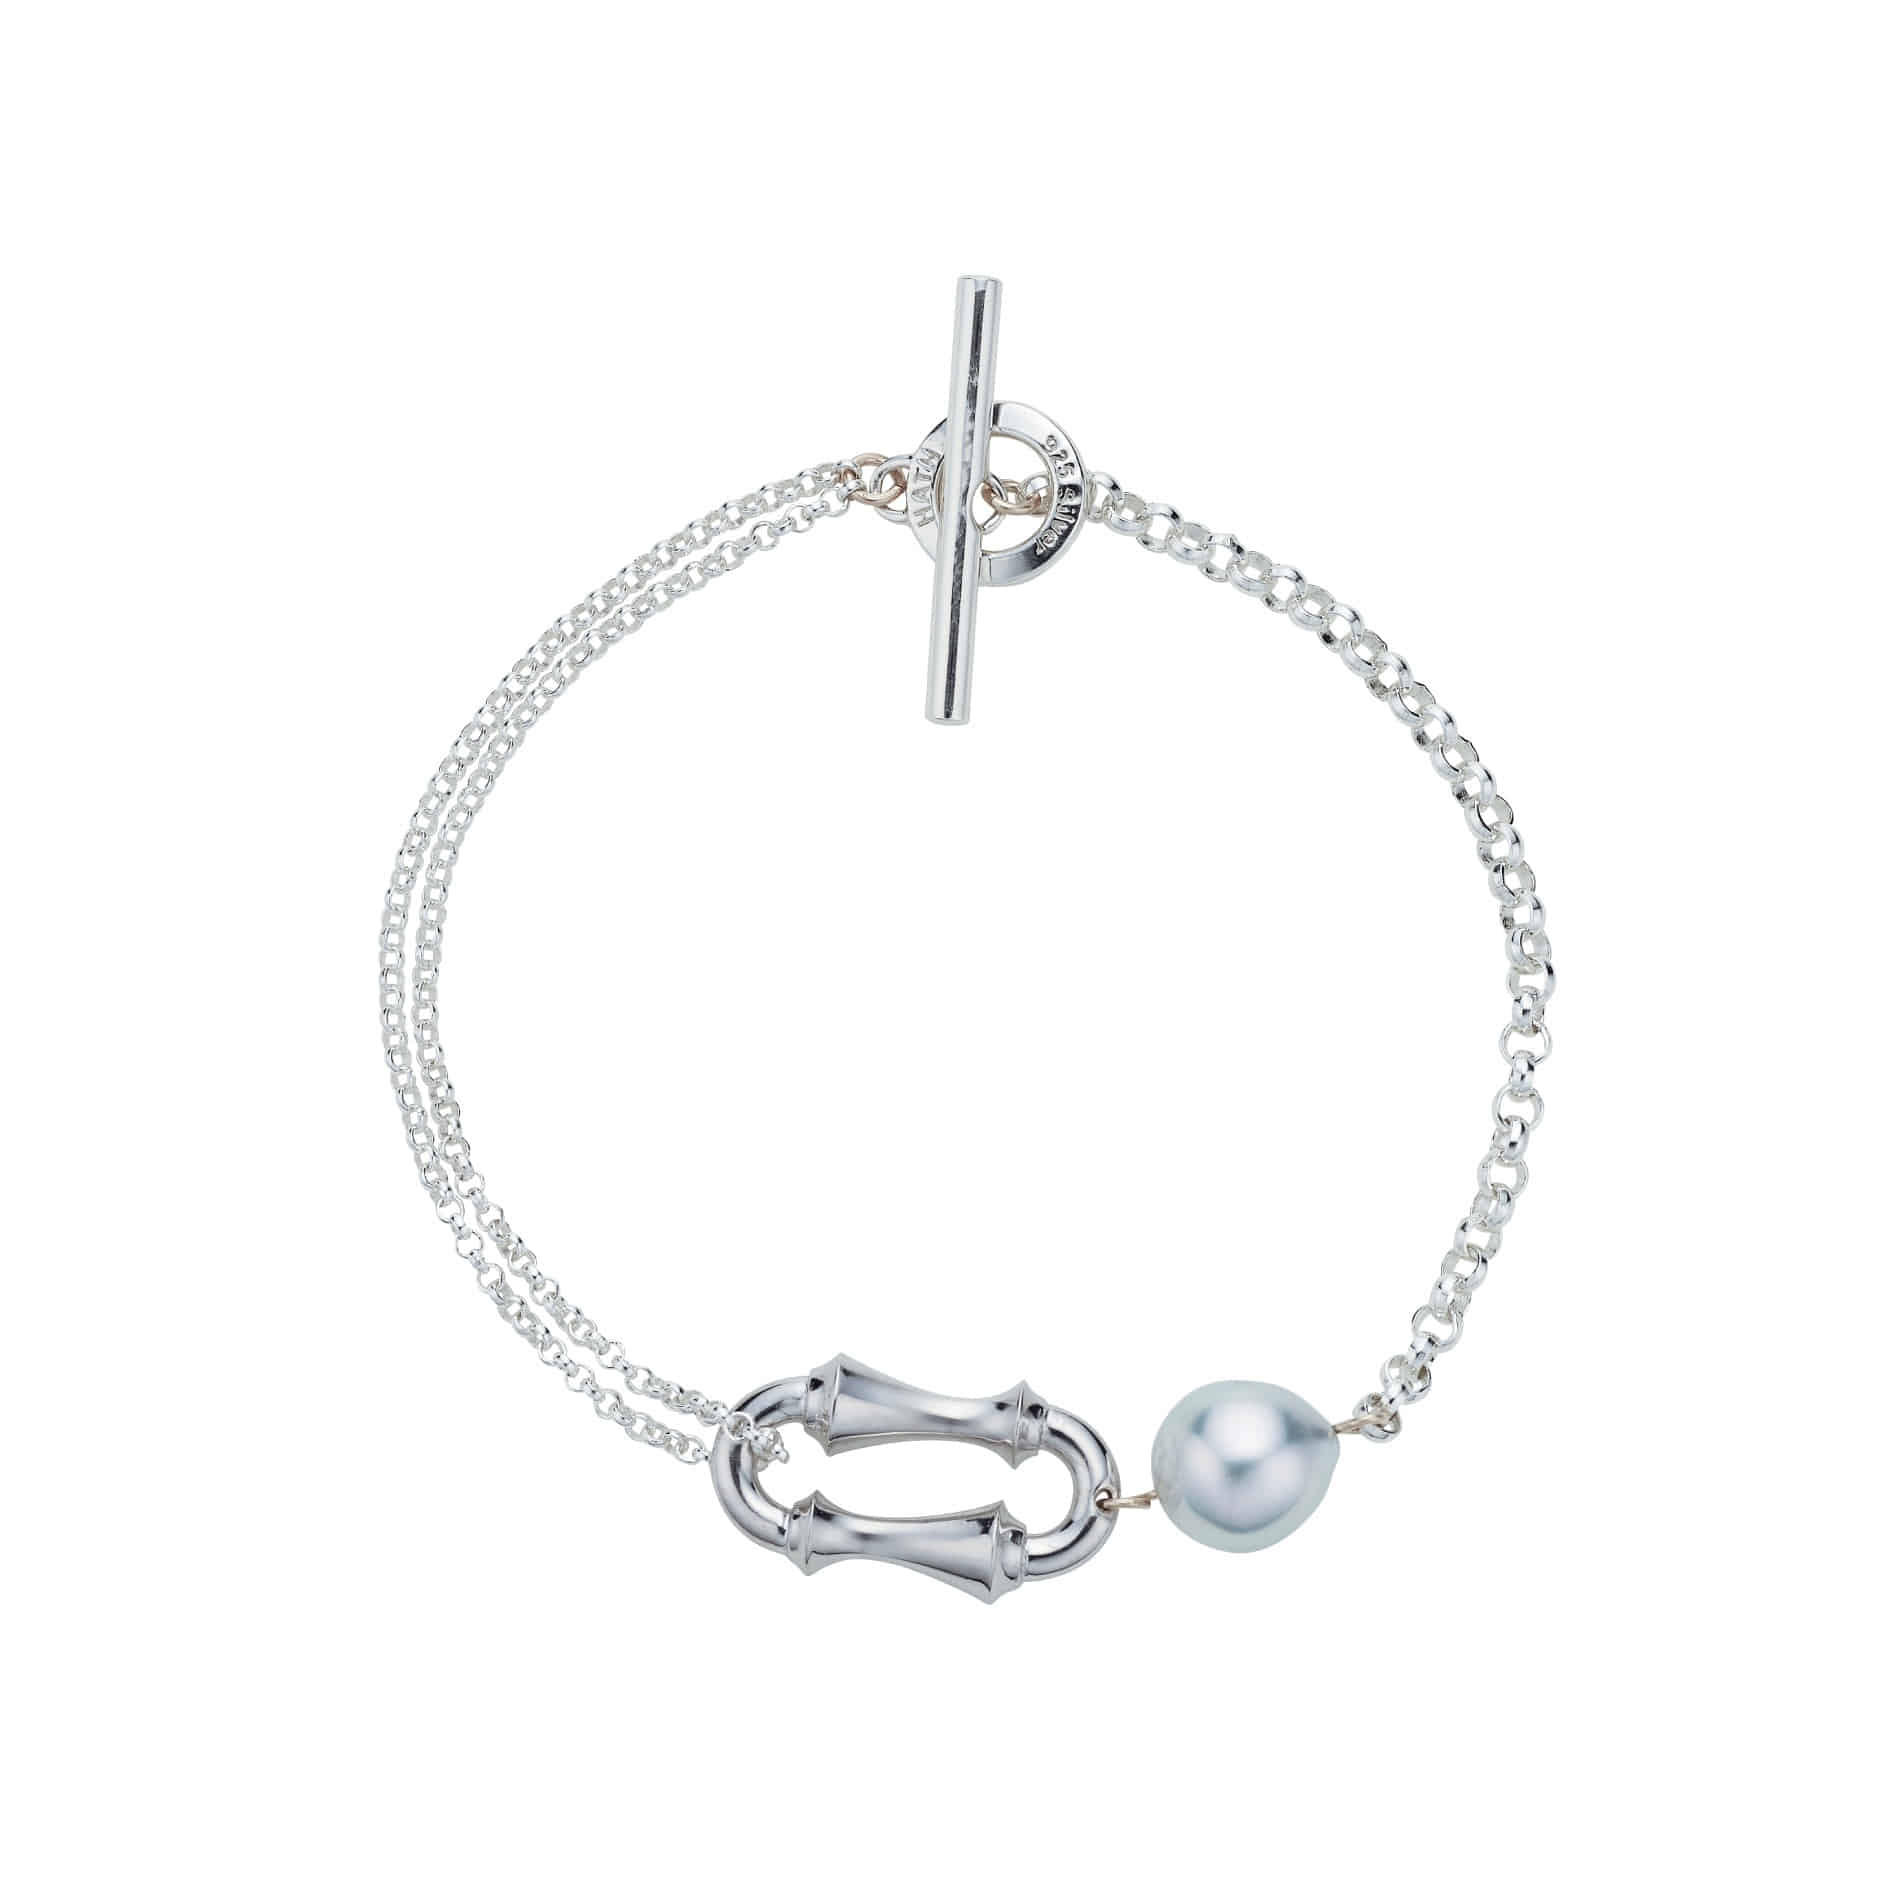 ARC T1 Bracelet in Sterling Silver with an Akoya Pearl